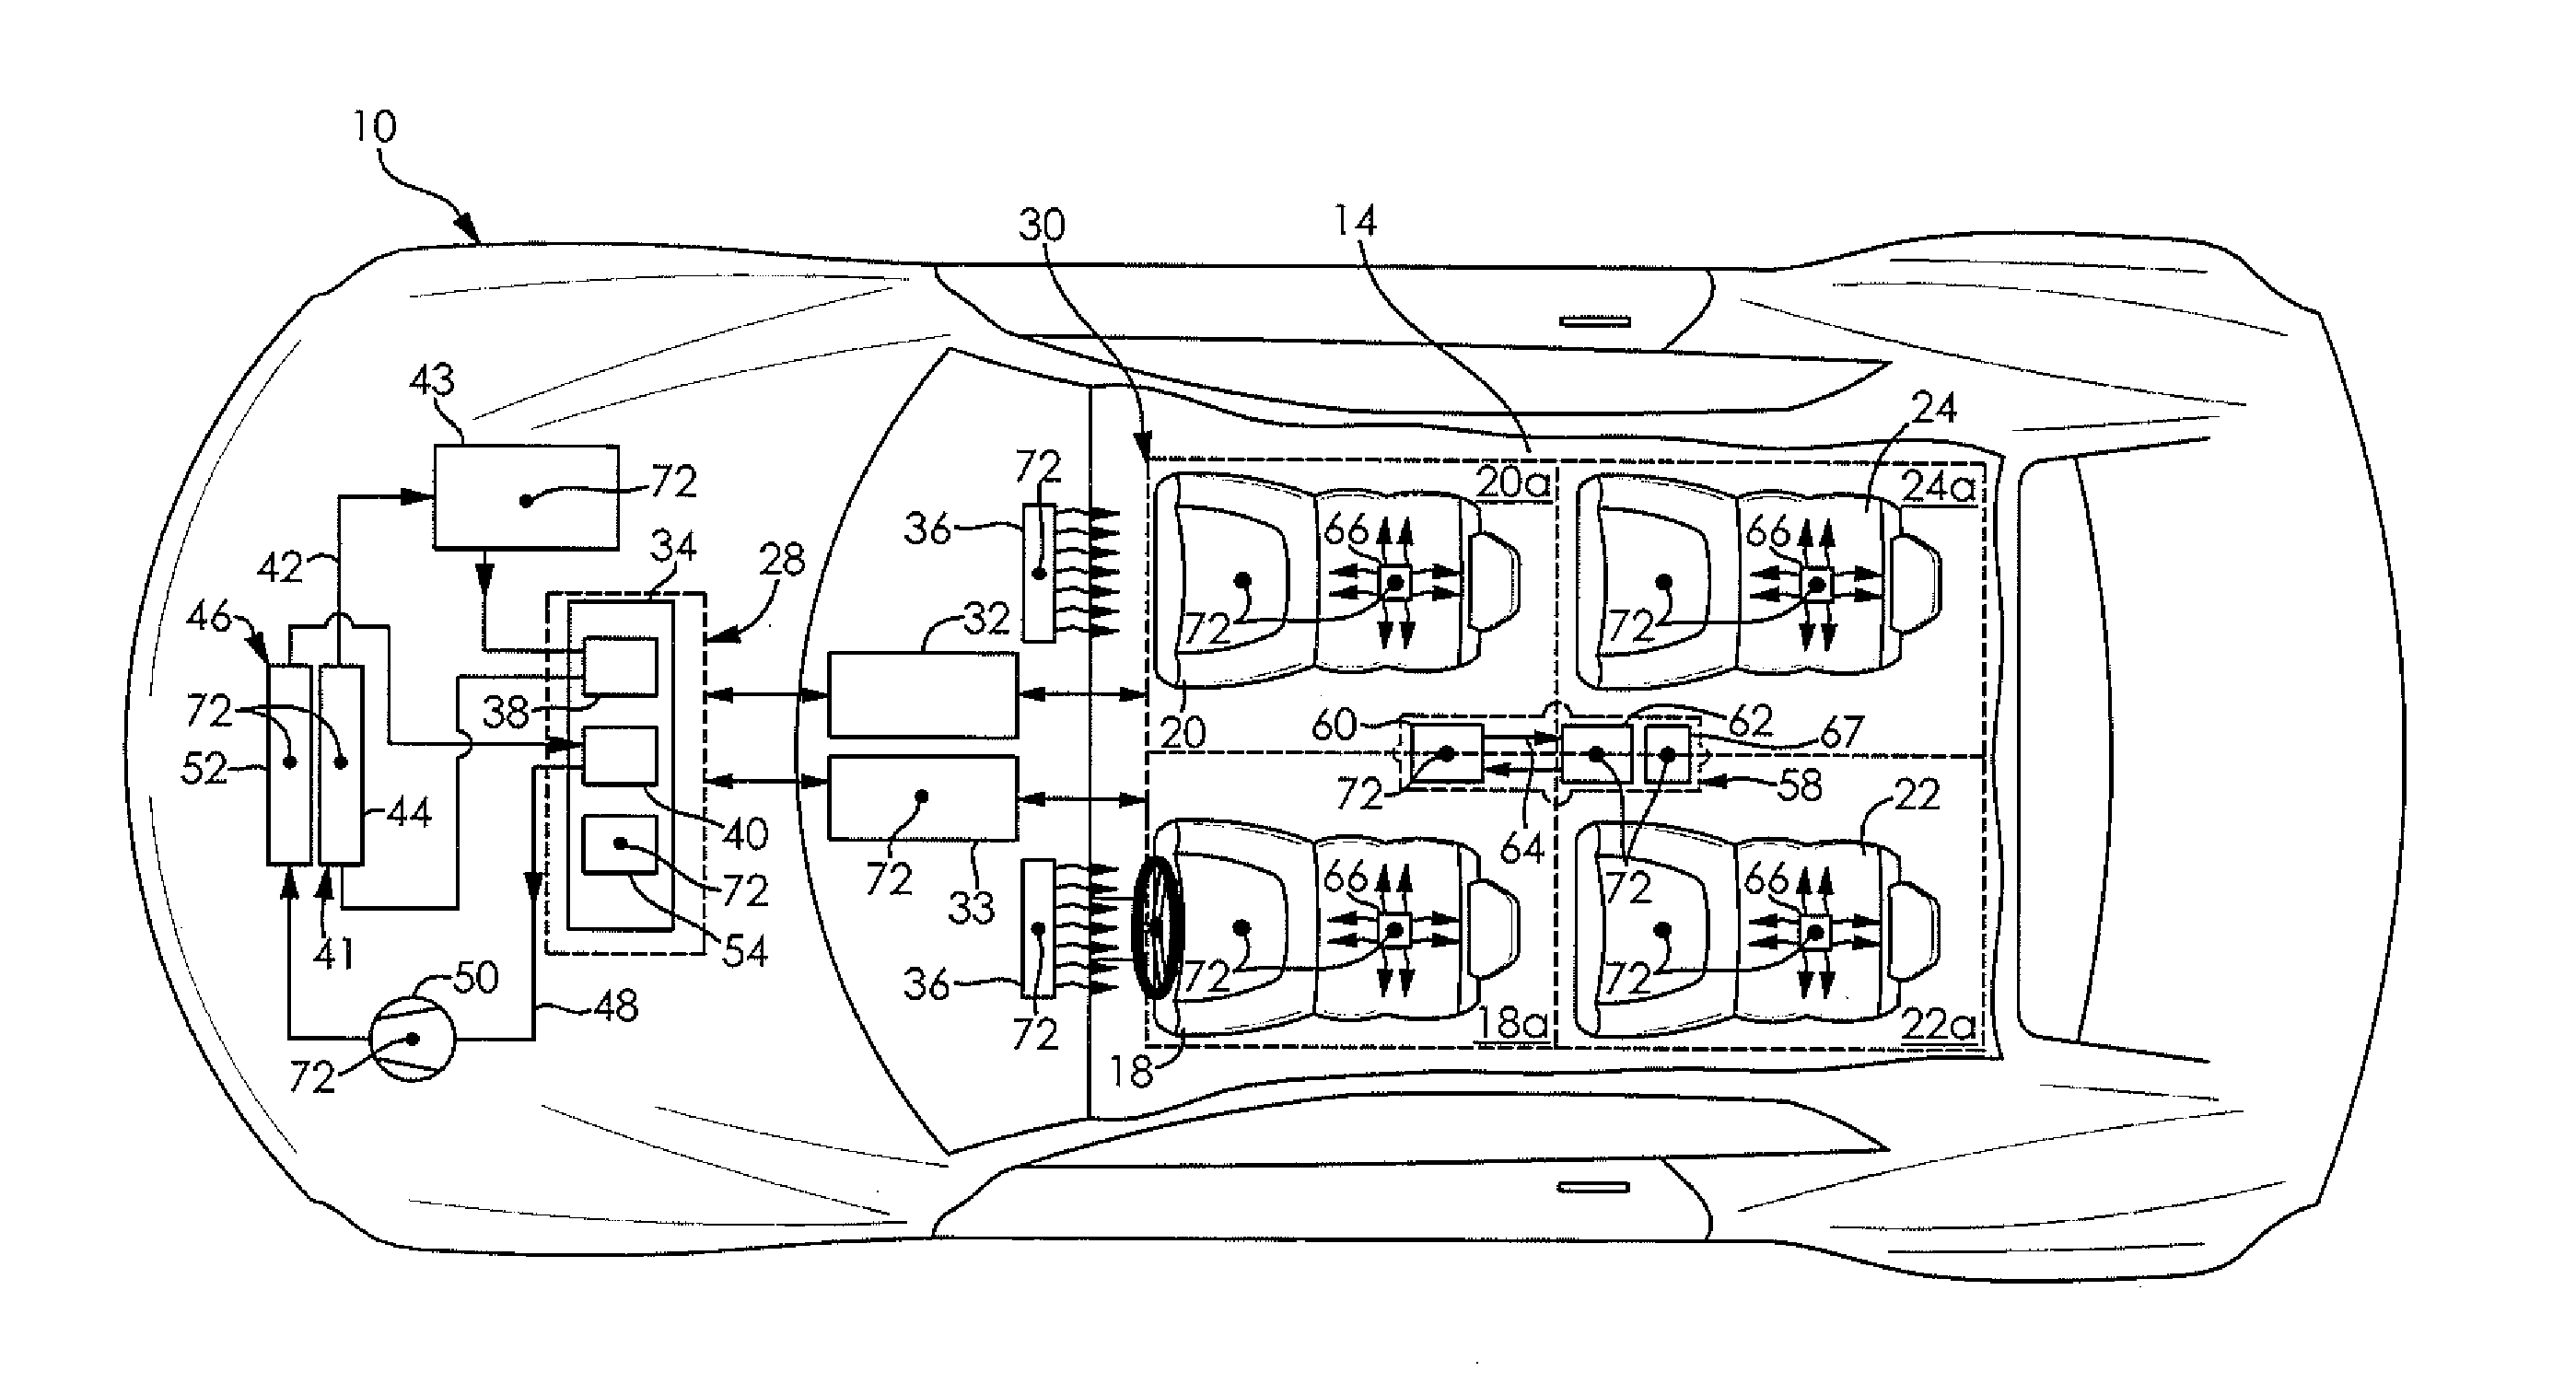 Control strategy for a zonal heating, ventilating, and air conditioning system of a vehicle